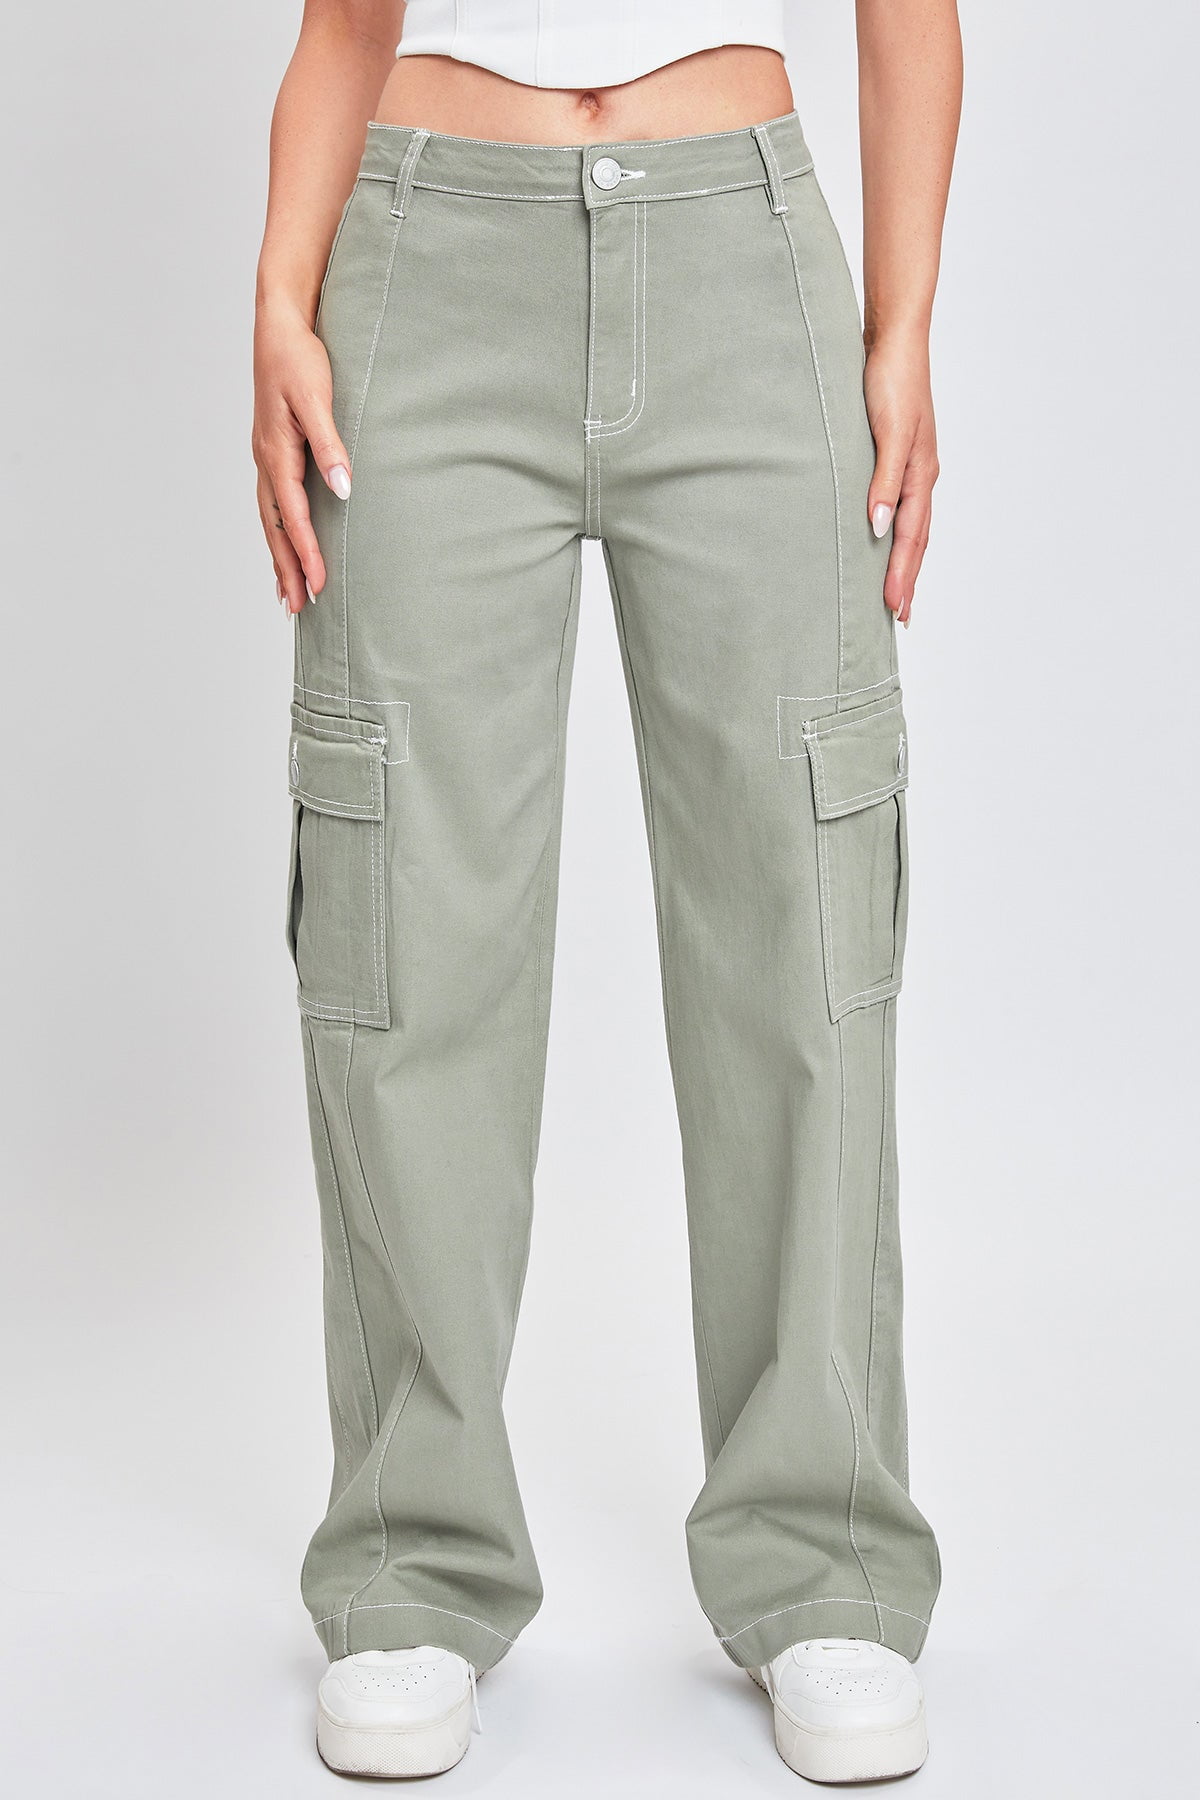 YMI Women's High Rise Cargo Pants With Front Seam Detail - Walmart.com